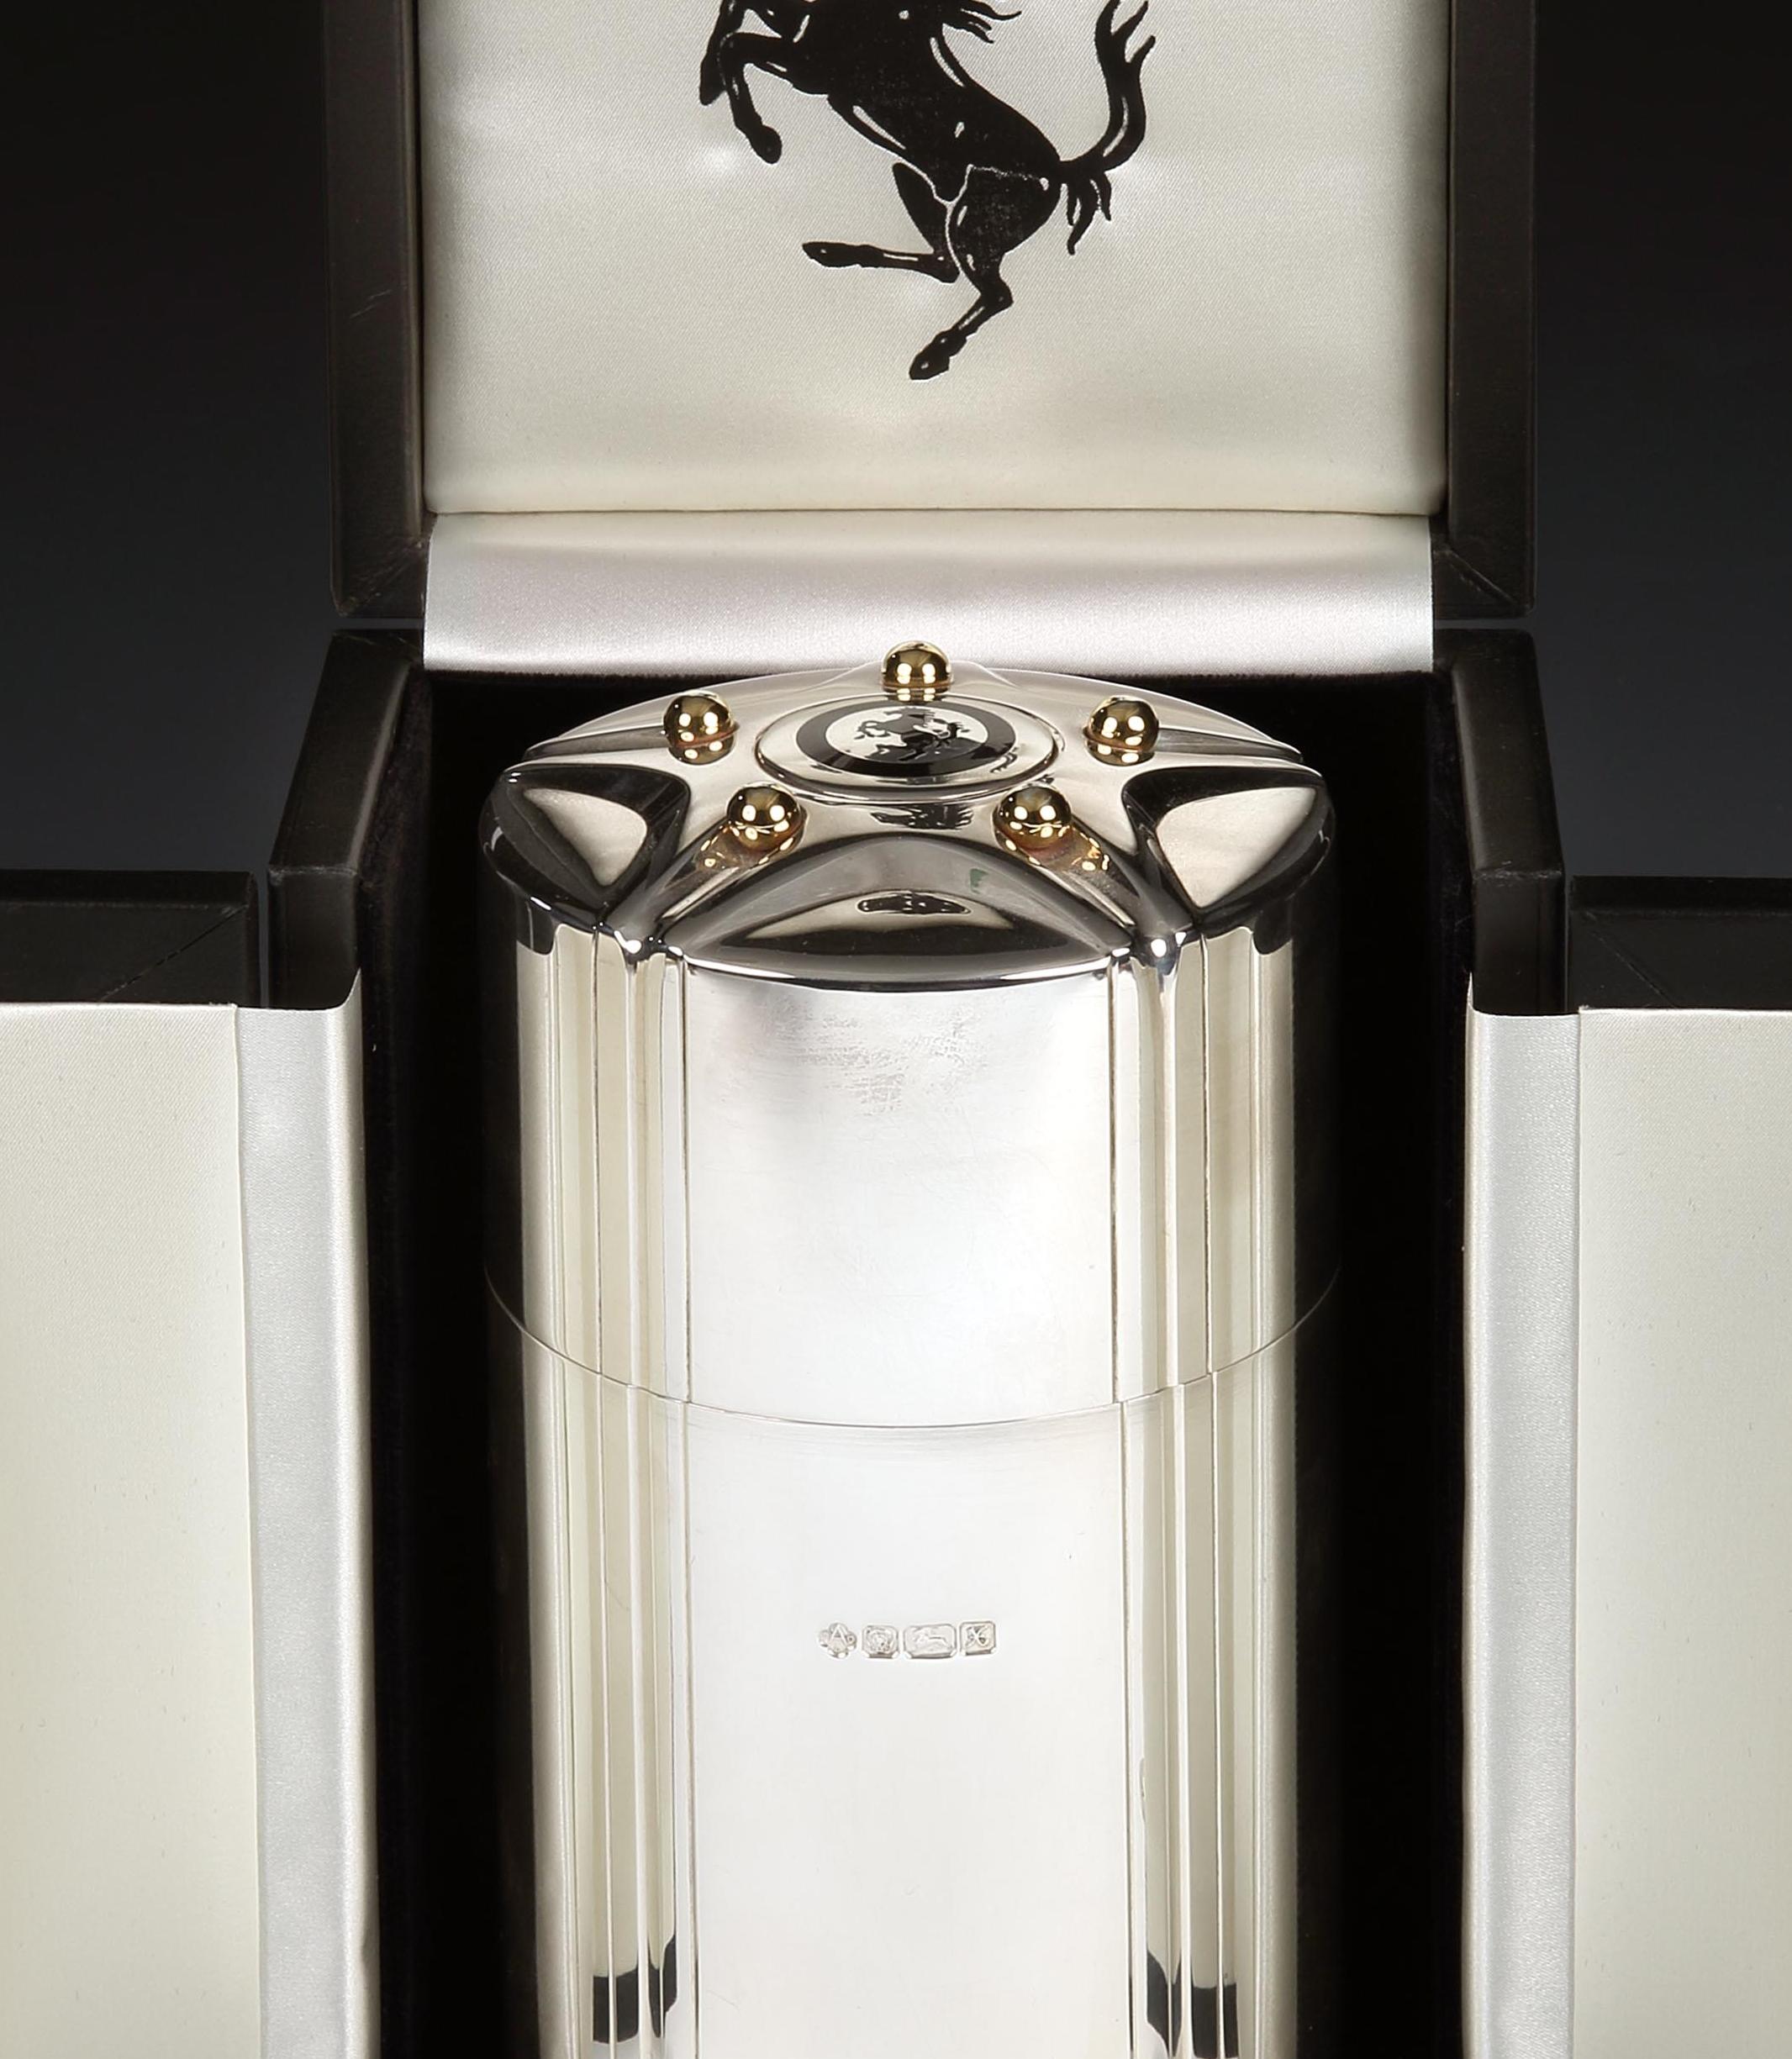 Asprey & Co. for Ferrari

An extremely unusual sterling silver cigar canister, the straight-sided 'drum' body with lift-off lid has the distinctive five-pointed wheel spoke design to the top with a central black enamel Cavallino Rampante, similar to